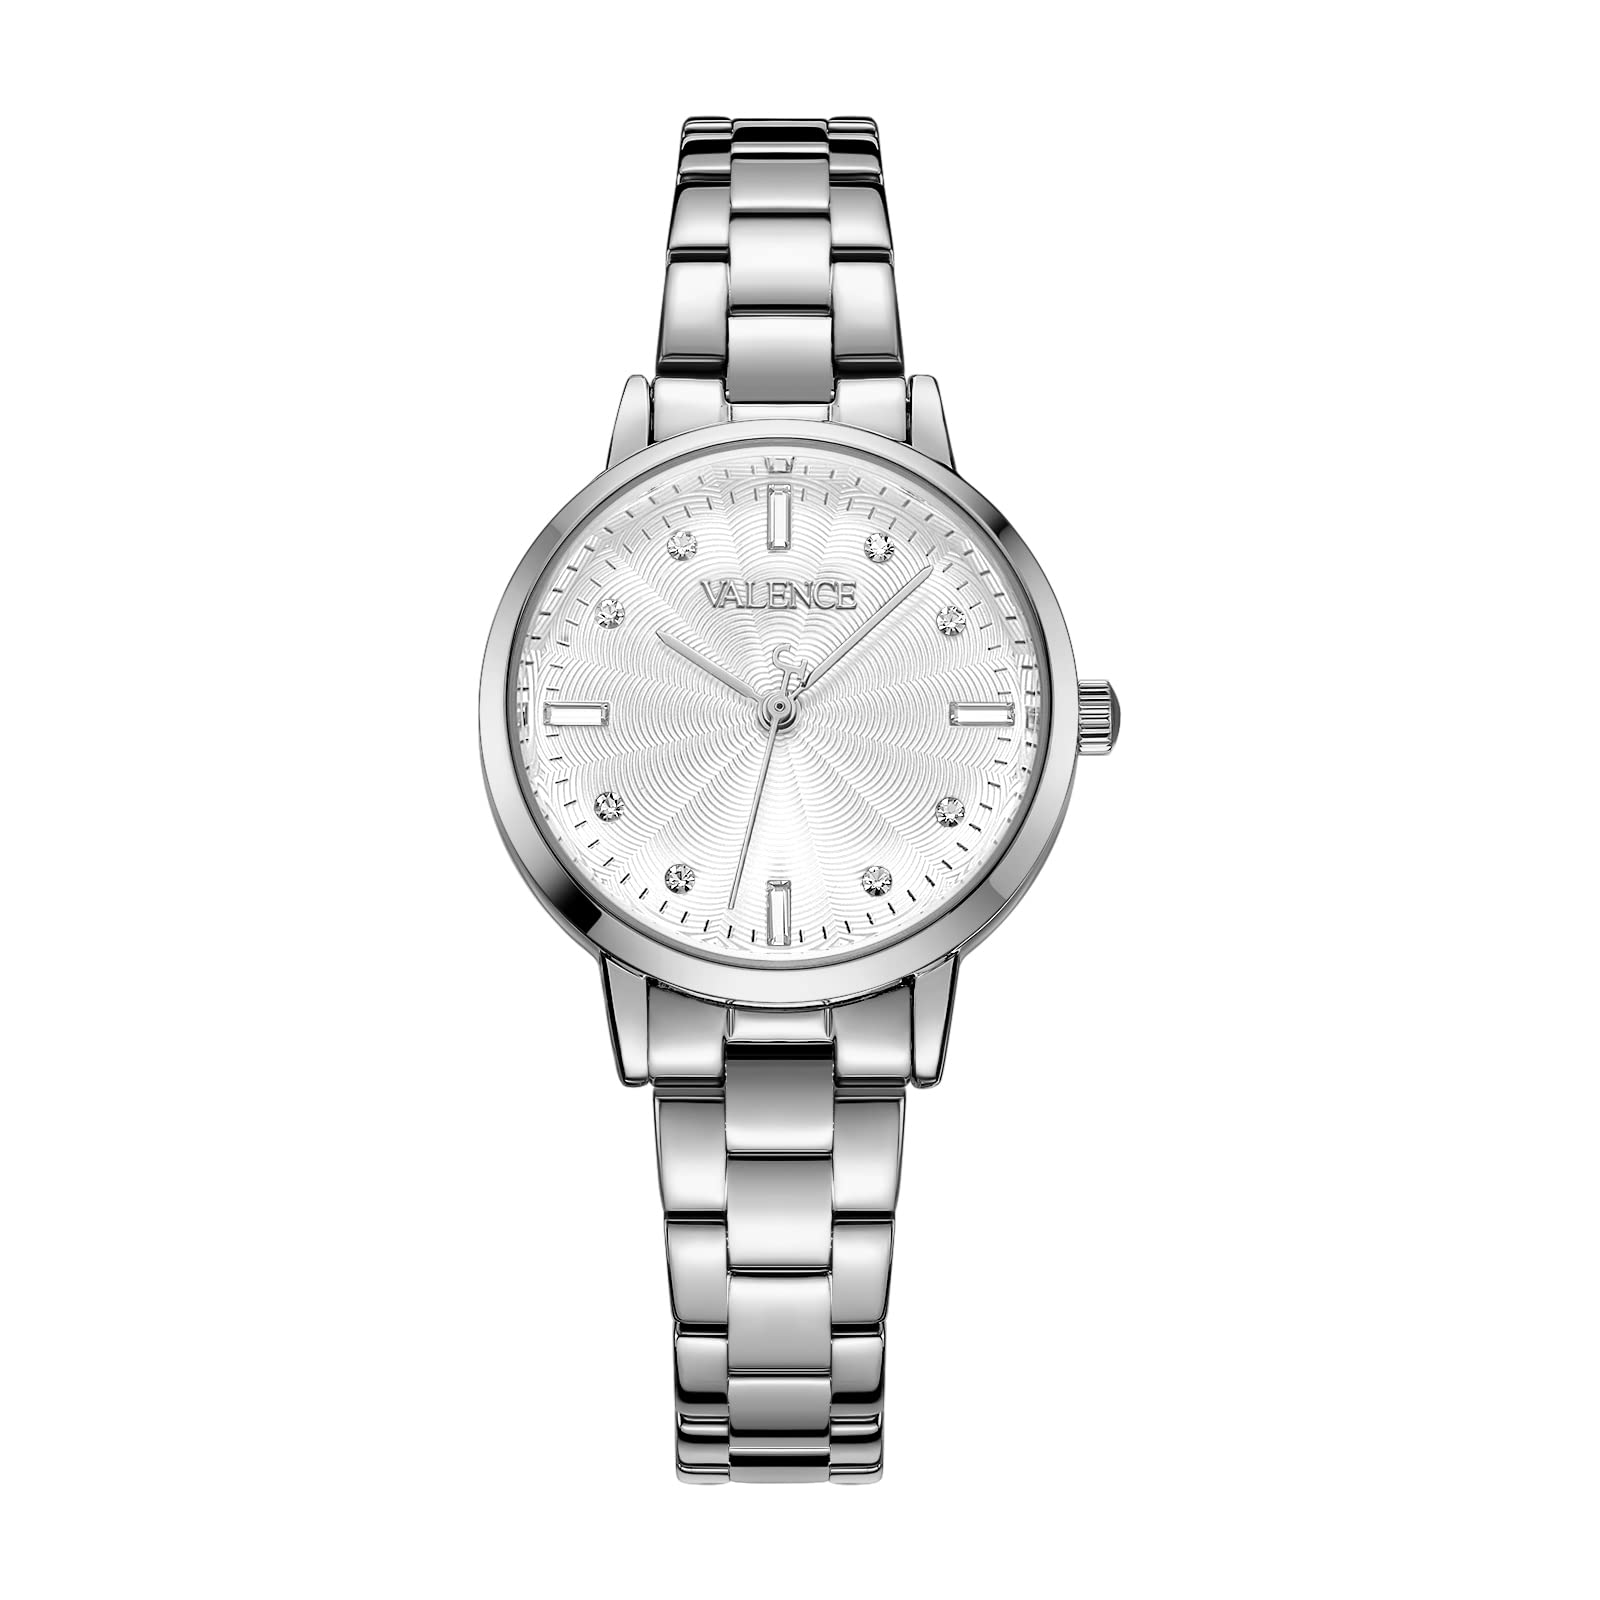 Valence Silver Women's Wrist Watches. Small Band Stainless Steel Luminous Watches for Women. Classic Ladies Quartz Watches with Stainless Steel Band. Womens Waterproof Watch (Model VC81)